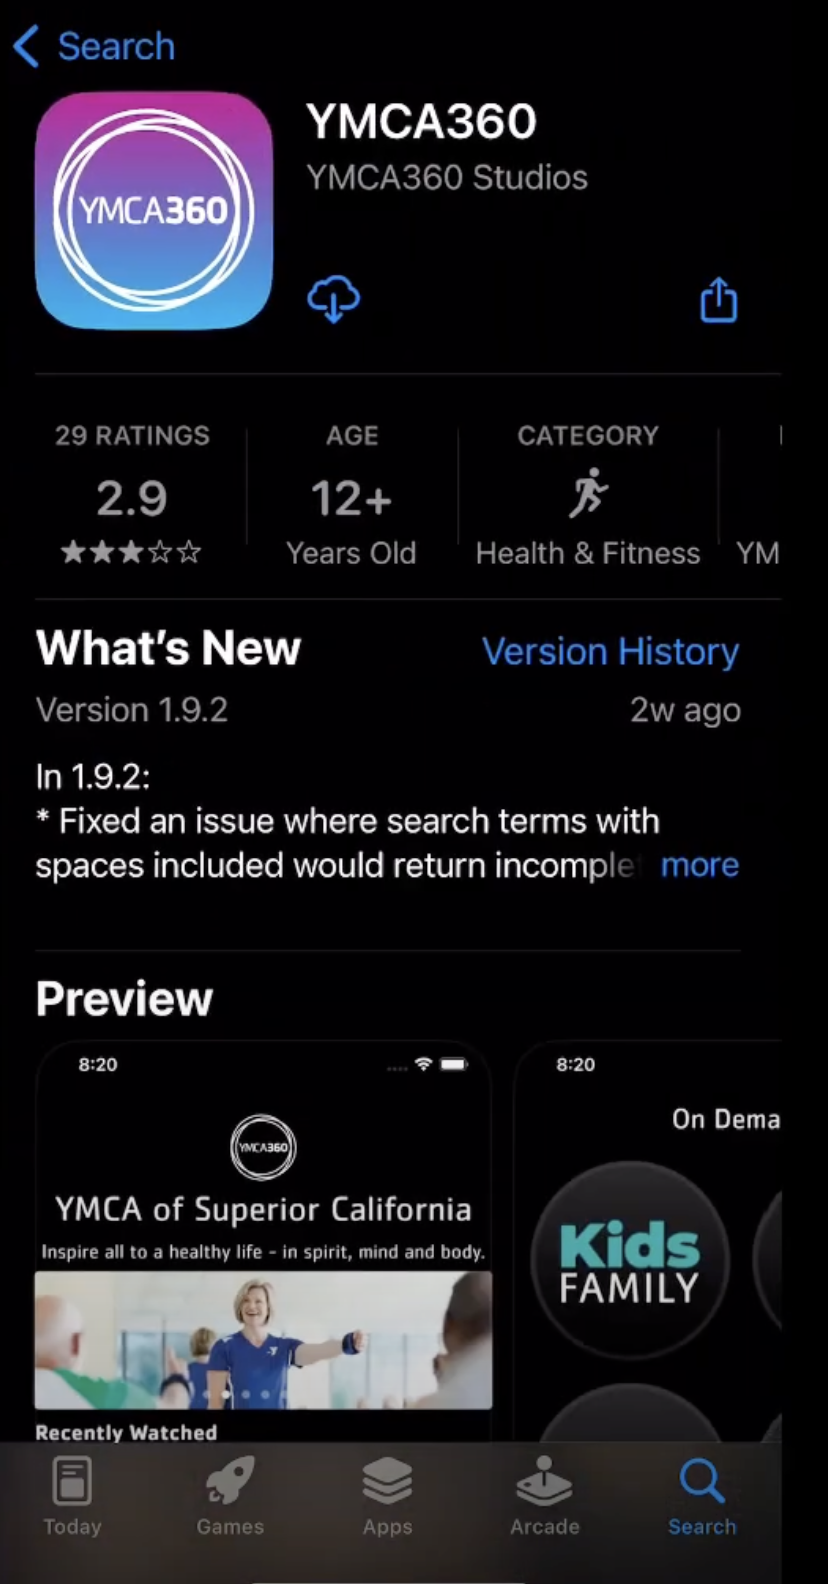 A screen capture of YMCA360 in the App store